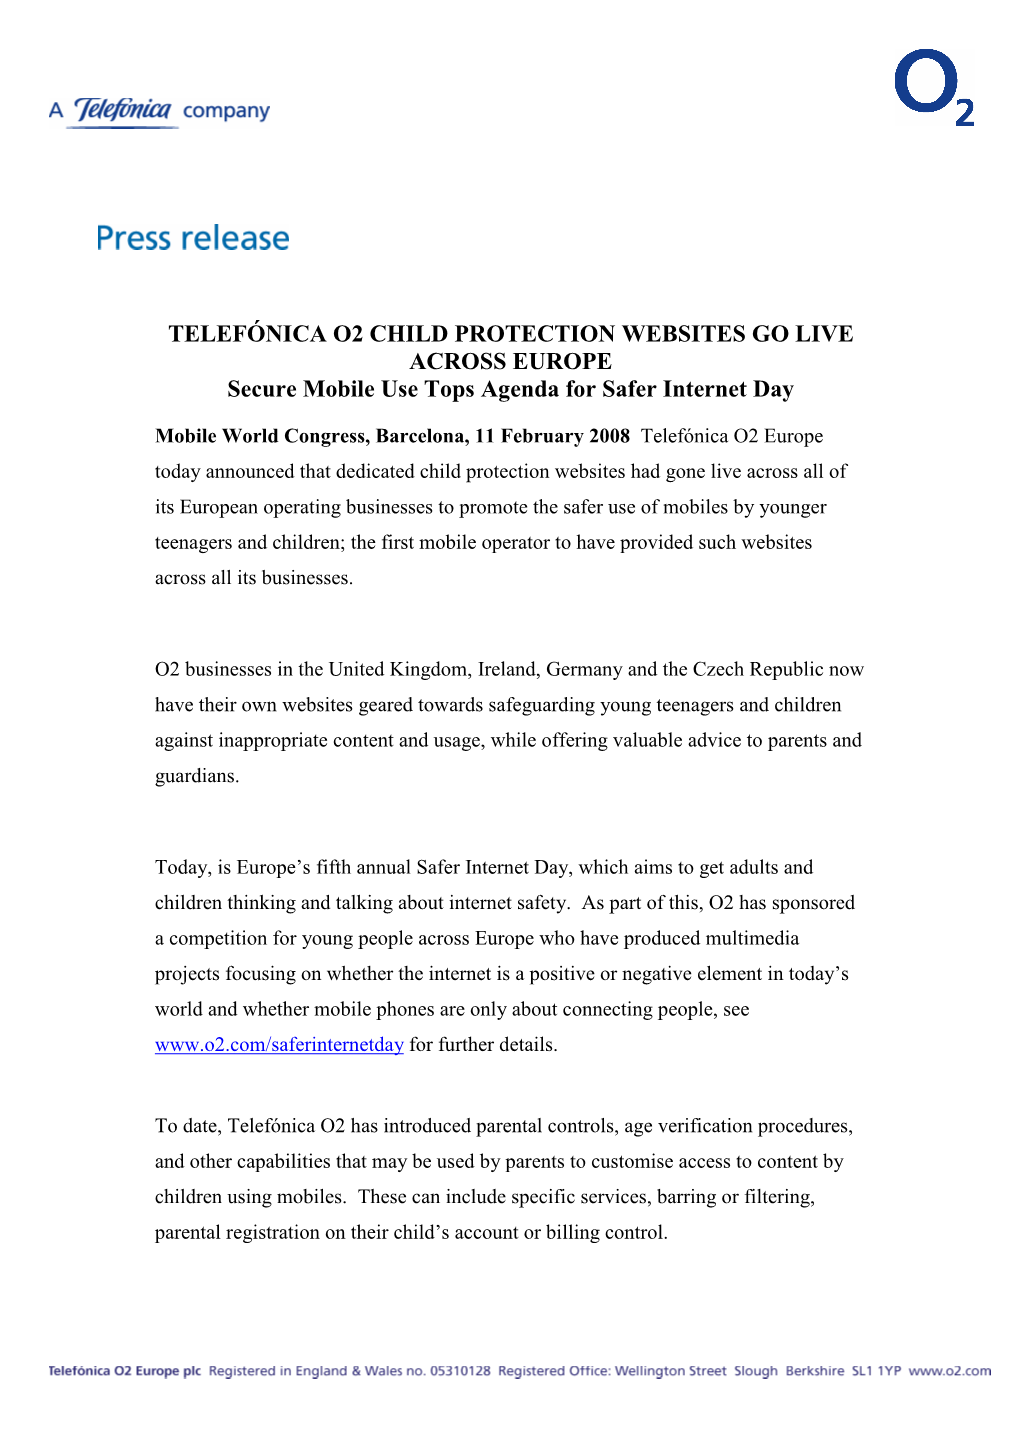 Child Protection Press Release